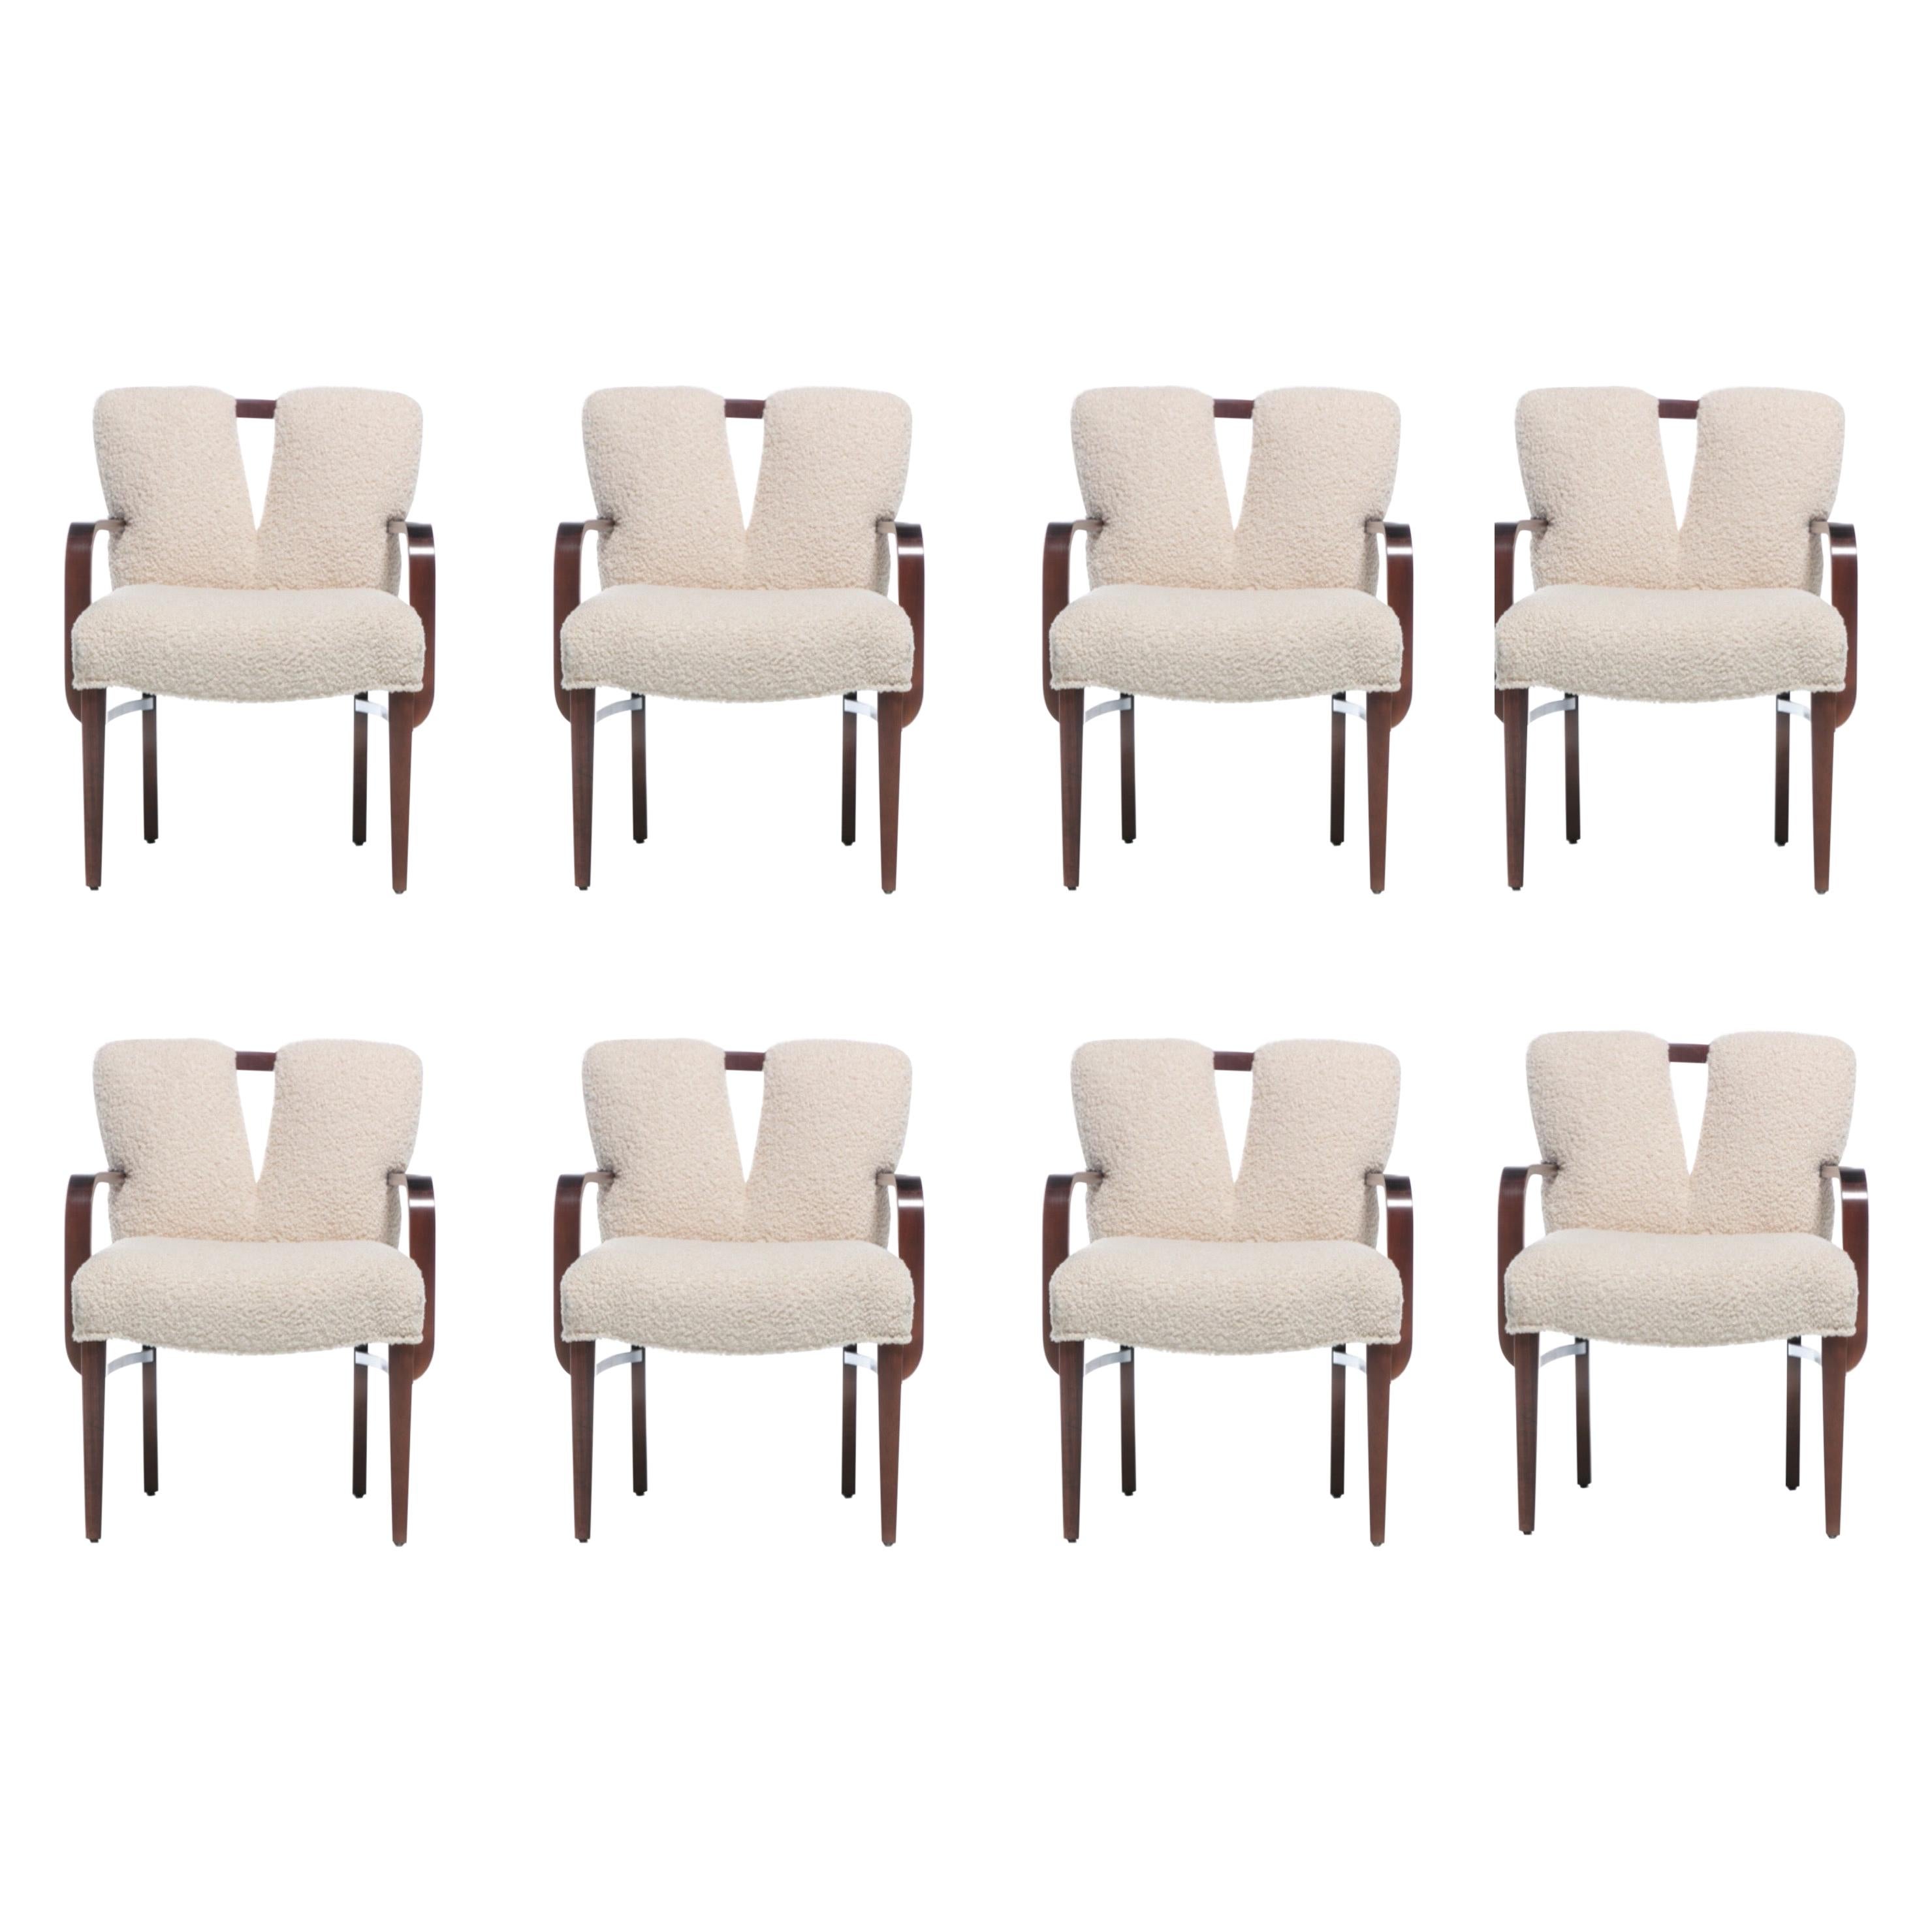 Set of 8 Paul Frankl Corset Back Dining Armchairs in Ivory White Bouclé, c. 1950